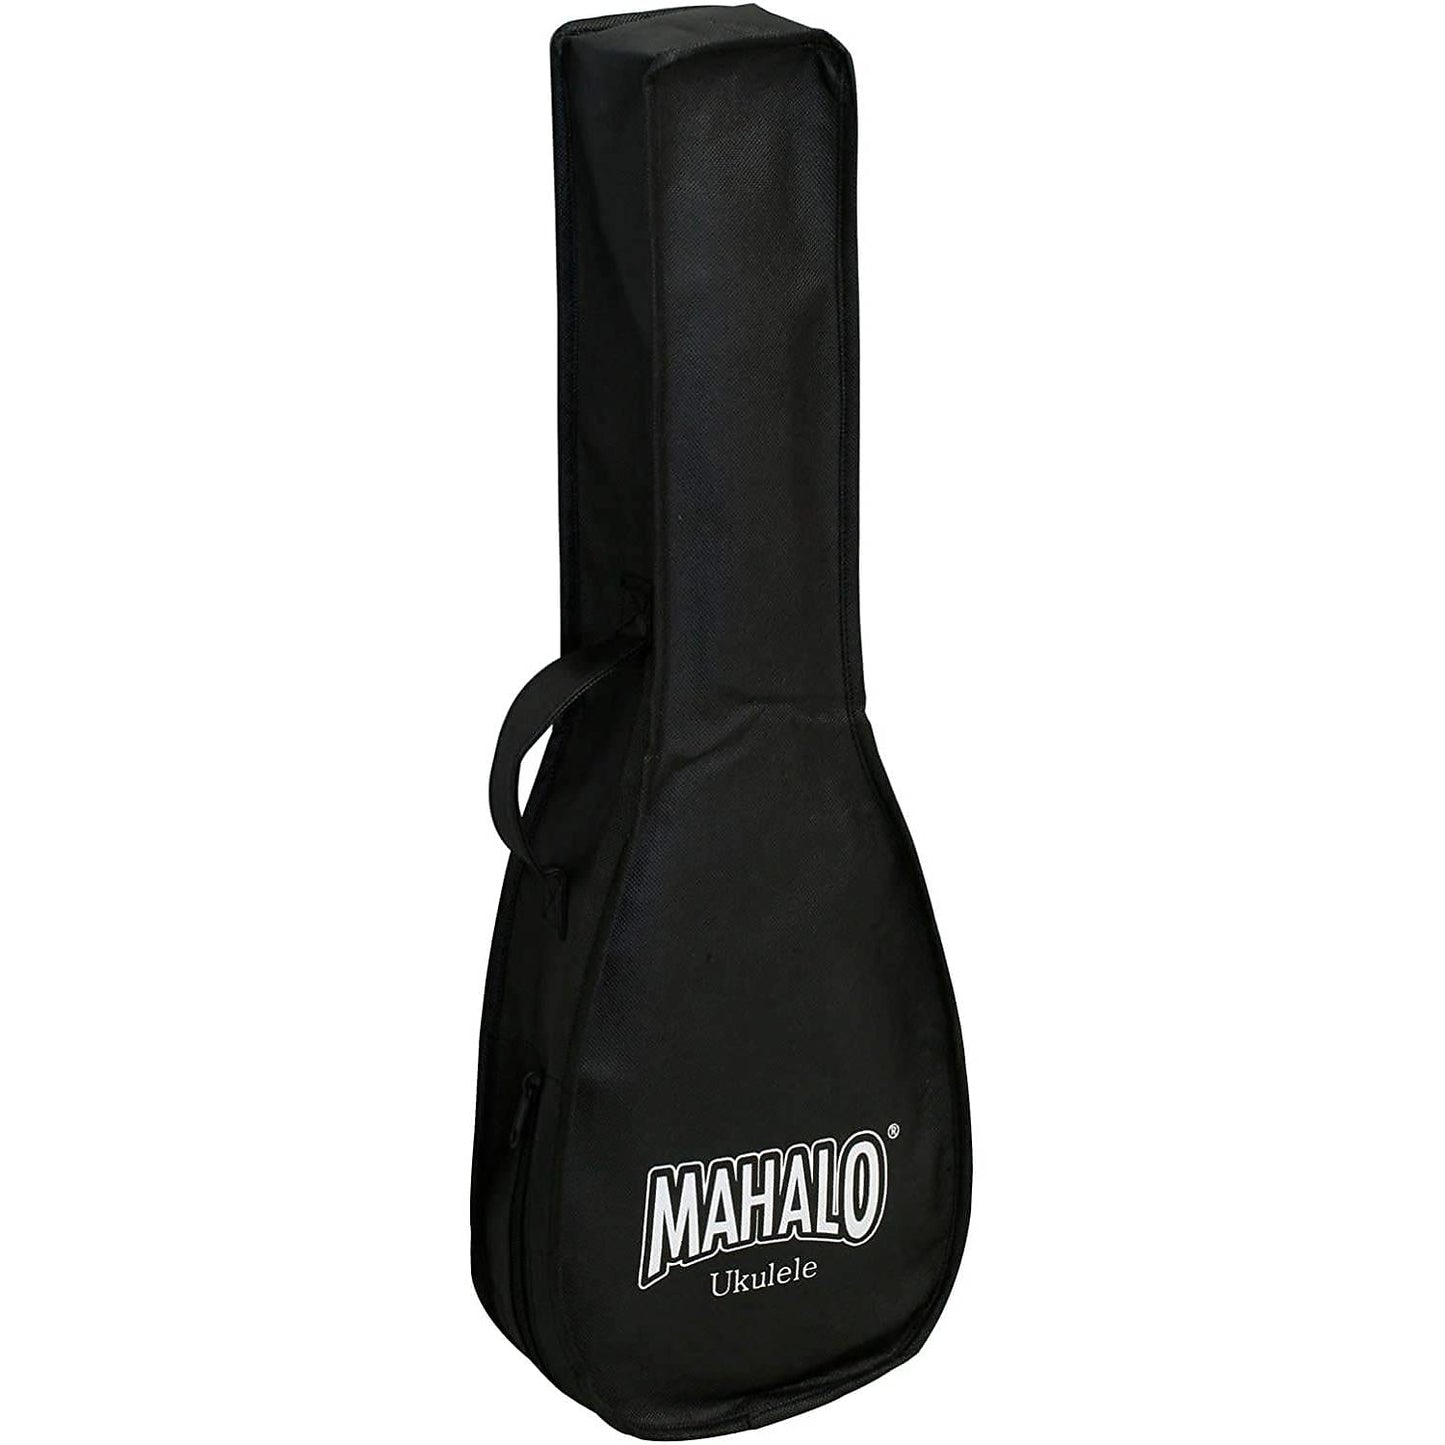 Mahalo Java Series Concert Electric Acoustic Ukulele MJ2 (3 Tone Sunburst) 4 String Guitar with 16 Frets and Preamp Tuner